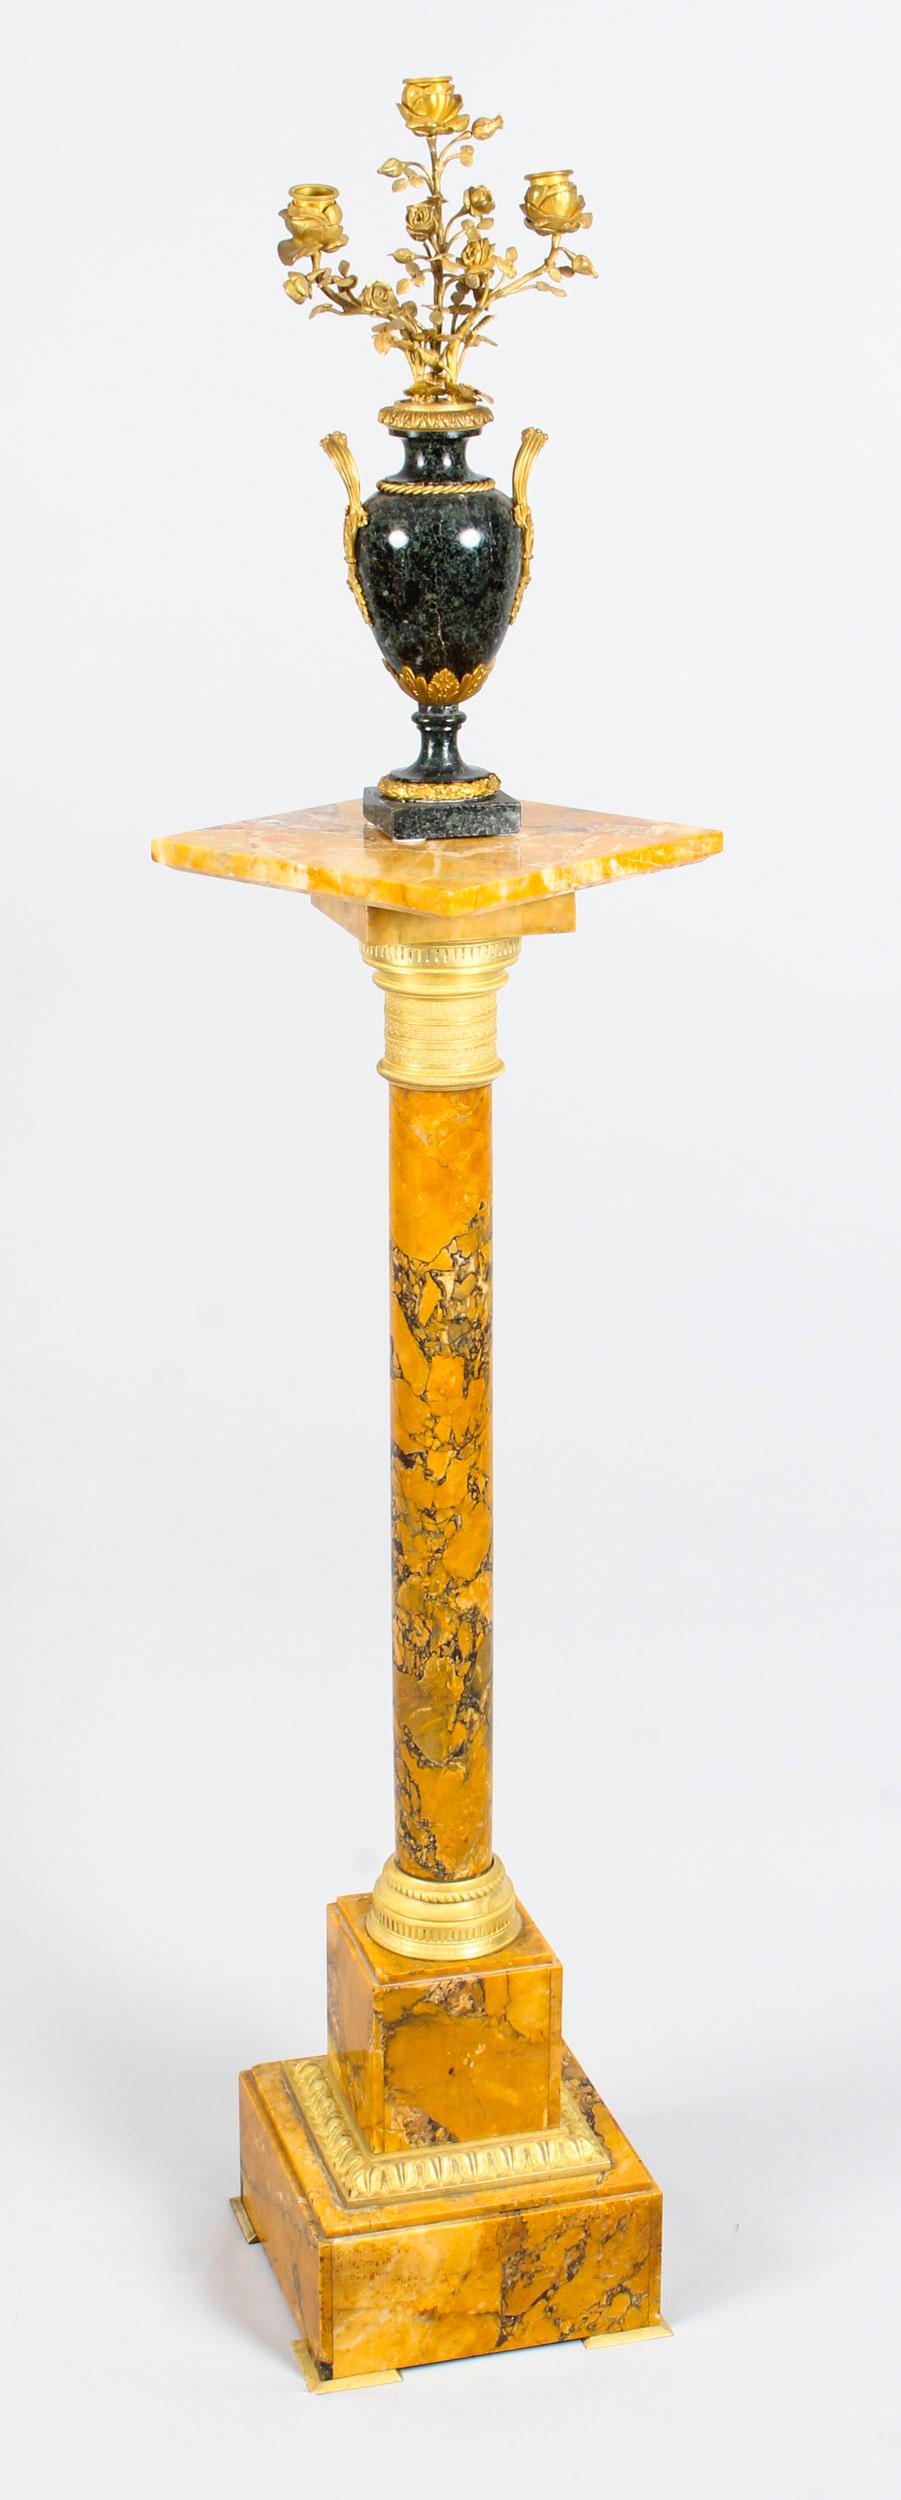 This is a magnificent antique Victorian ormolu mounted Italian sienna marble (also known as 'Giallo di Siena Unito') pedestal, late 19th century in date.

This sumptuous pedestal features an attractive square moulded platform top which is raised